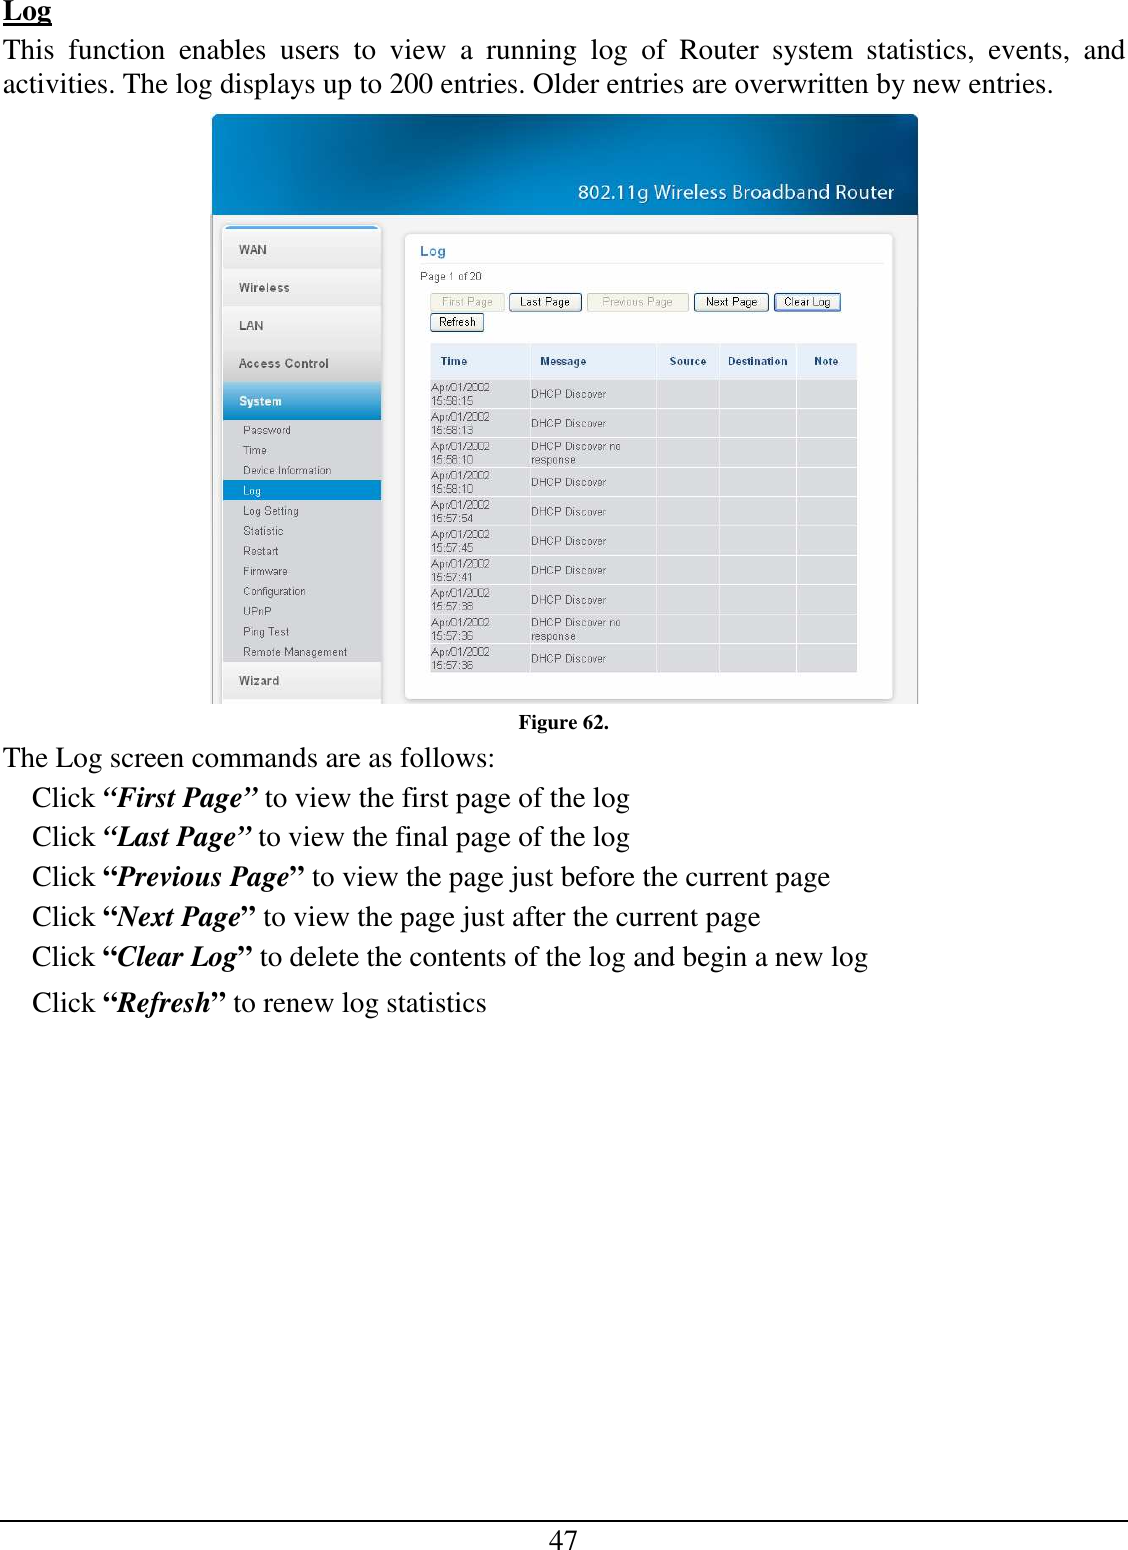 47 Log This  function  enables  users  to  view  a  running  log  of  Router  system  statistics,  events,  and activities. The log displays up to 200 entries. Older entries are overwritten by new entries.   Figure 62. The Log screen commands are as follows: Click “First Page” to view the first page of the log Click “Last Page” to view the final page of the log Click “Previous Page” to view the page just before the current page Click “Next Page” to view the page just after the current page Click “Clear Log” to delete the contents of the log and begin a new log Click “Refresh” to renew log statistics 